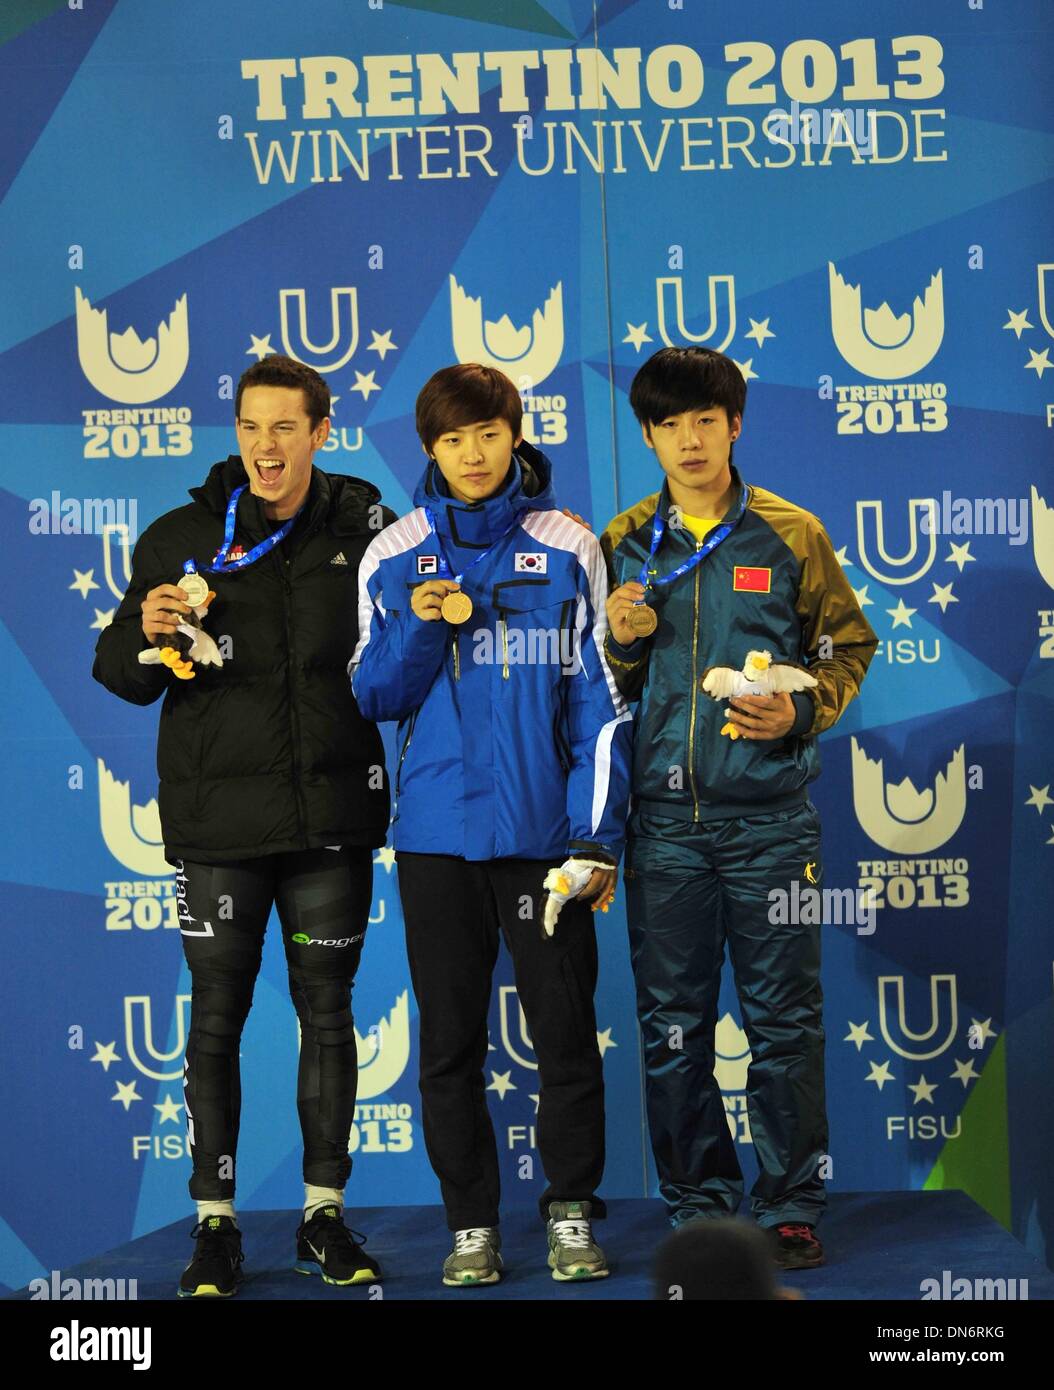 Trentino, Italy. 19th Dec, 2013. Gold medallist South Korea's Lee Hyobeen (C), silver medallist Canada's Patrick Robert Pippy Duffy (L) and China's Shi Jingnan pose for photos during the awarding ceremony of the men's short track 500m at the 26th Winter Universiade in Trentino, Italy, Dec. 19, 2013. Credit:  He Changshan/Xinhua/Alamy Live News Stock Photo